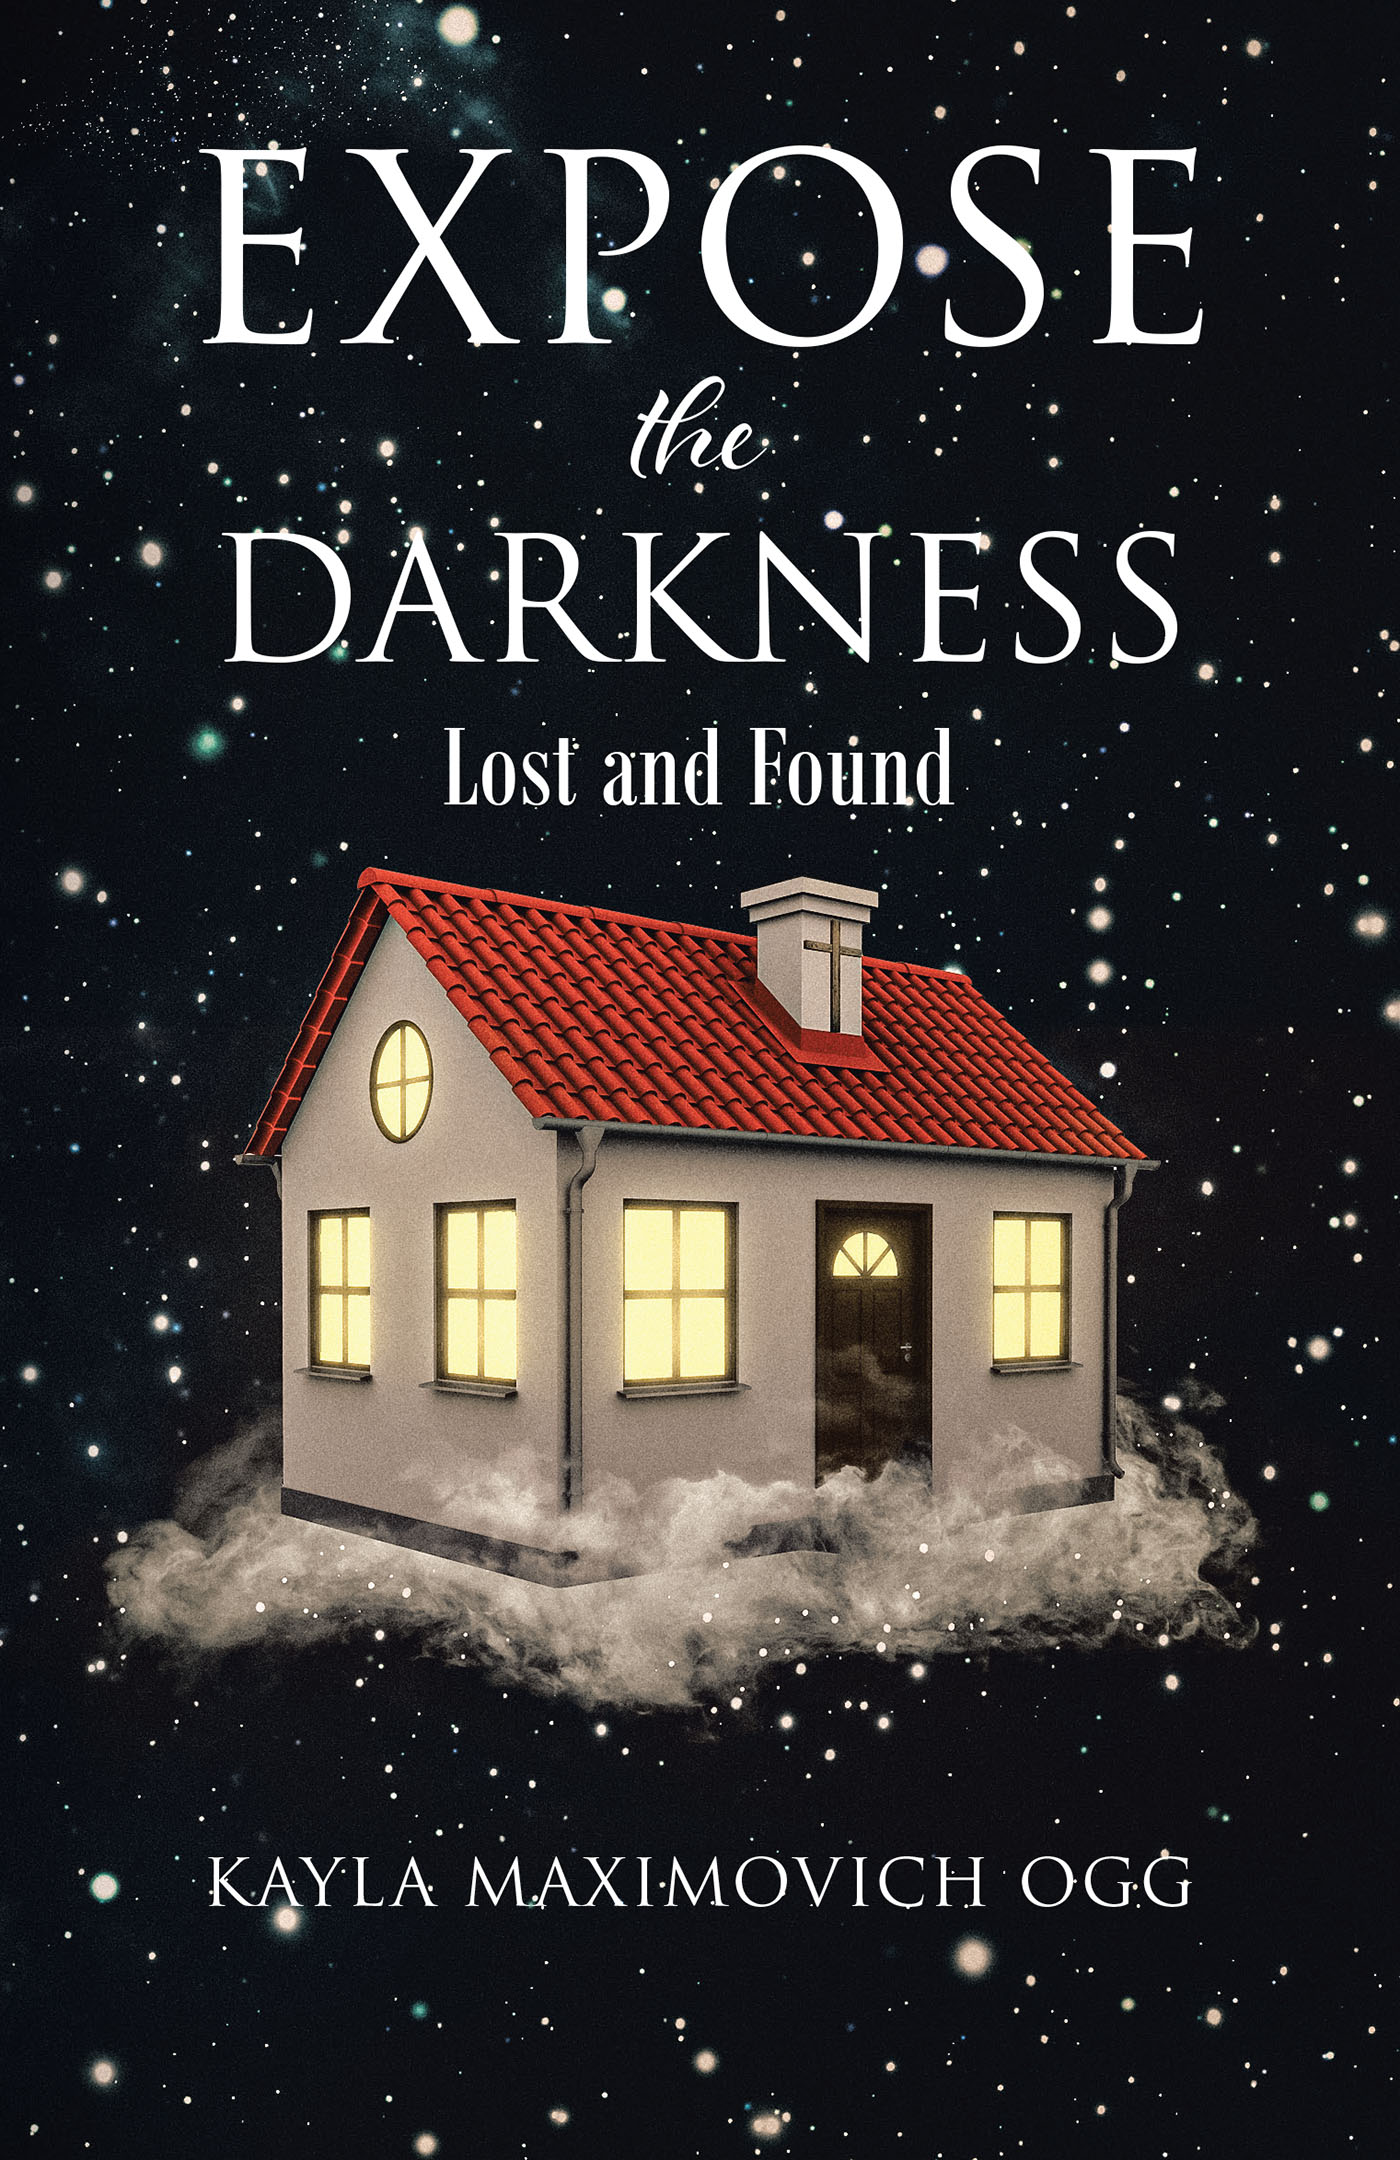 Kayla Maximovich Ogg’s Newly Released "Expose the Darkness: Lost and Found" is a Thought-Provoking Memoir That Takes Readers on a Journey of Discovery